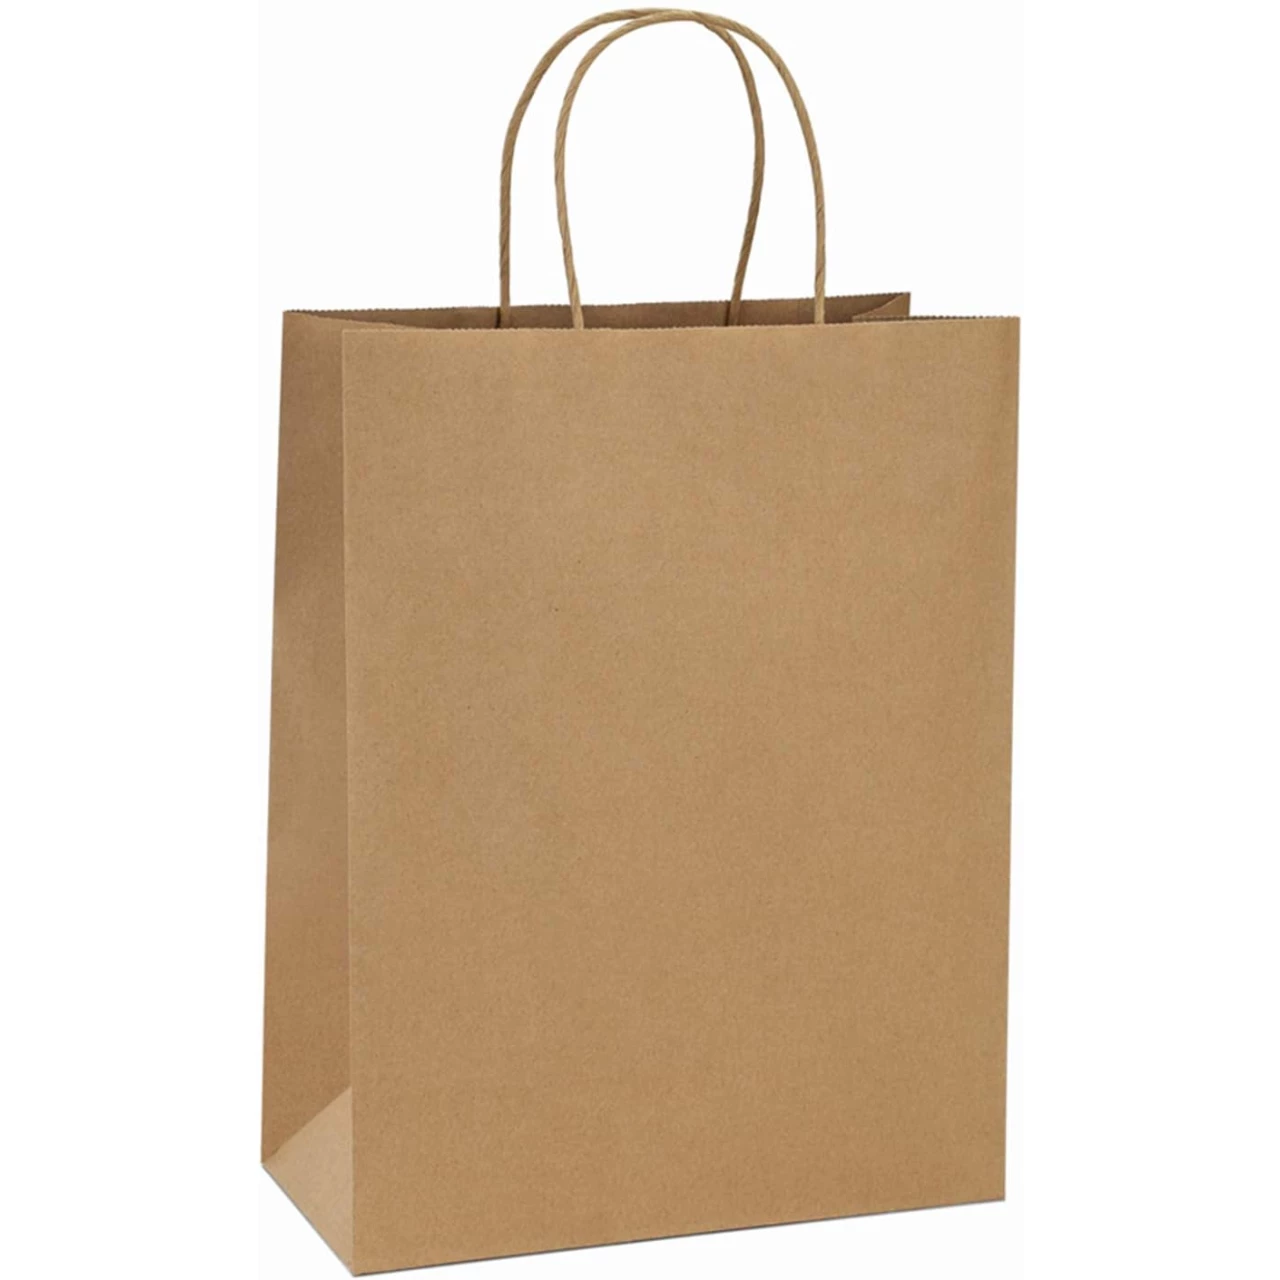 BagDream 10x5x13 Kraft Shopping Bags 100Pcs Brown Paper Bags Paper Gift Bags, Merchandise Bags, Retail Bags, Party Bags, 100% Recycled Paper Bags with Handles Bulk